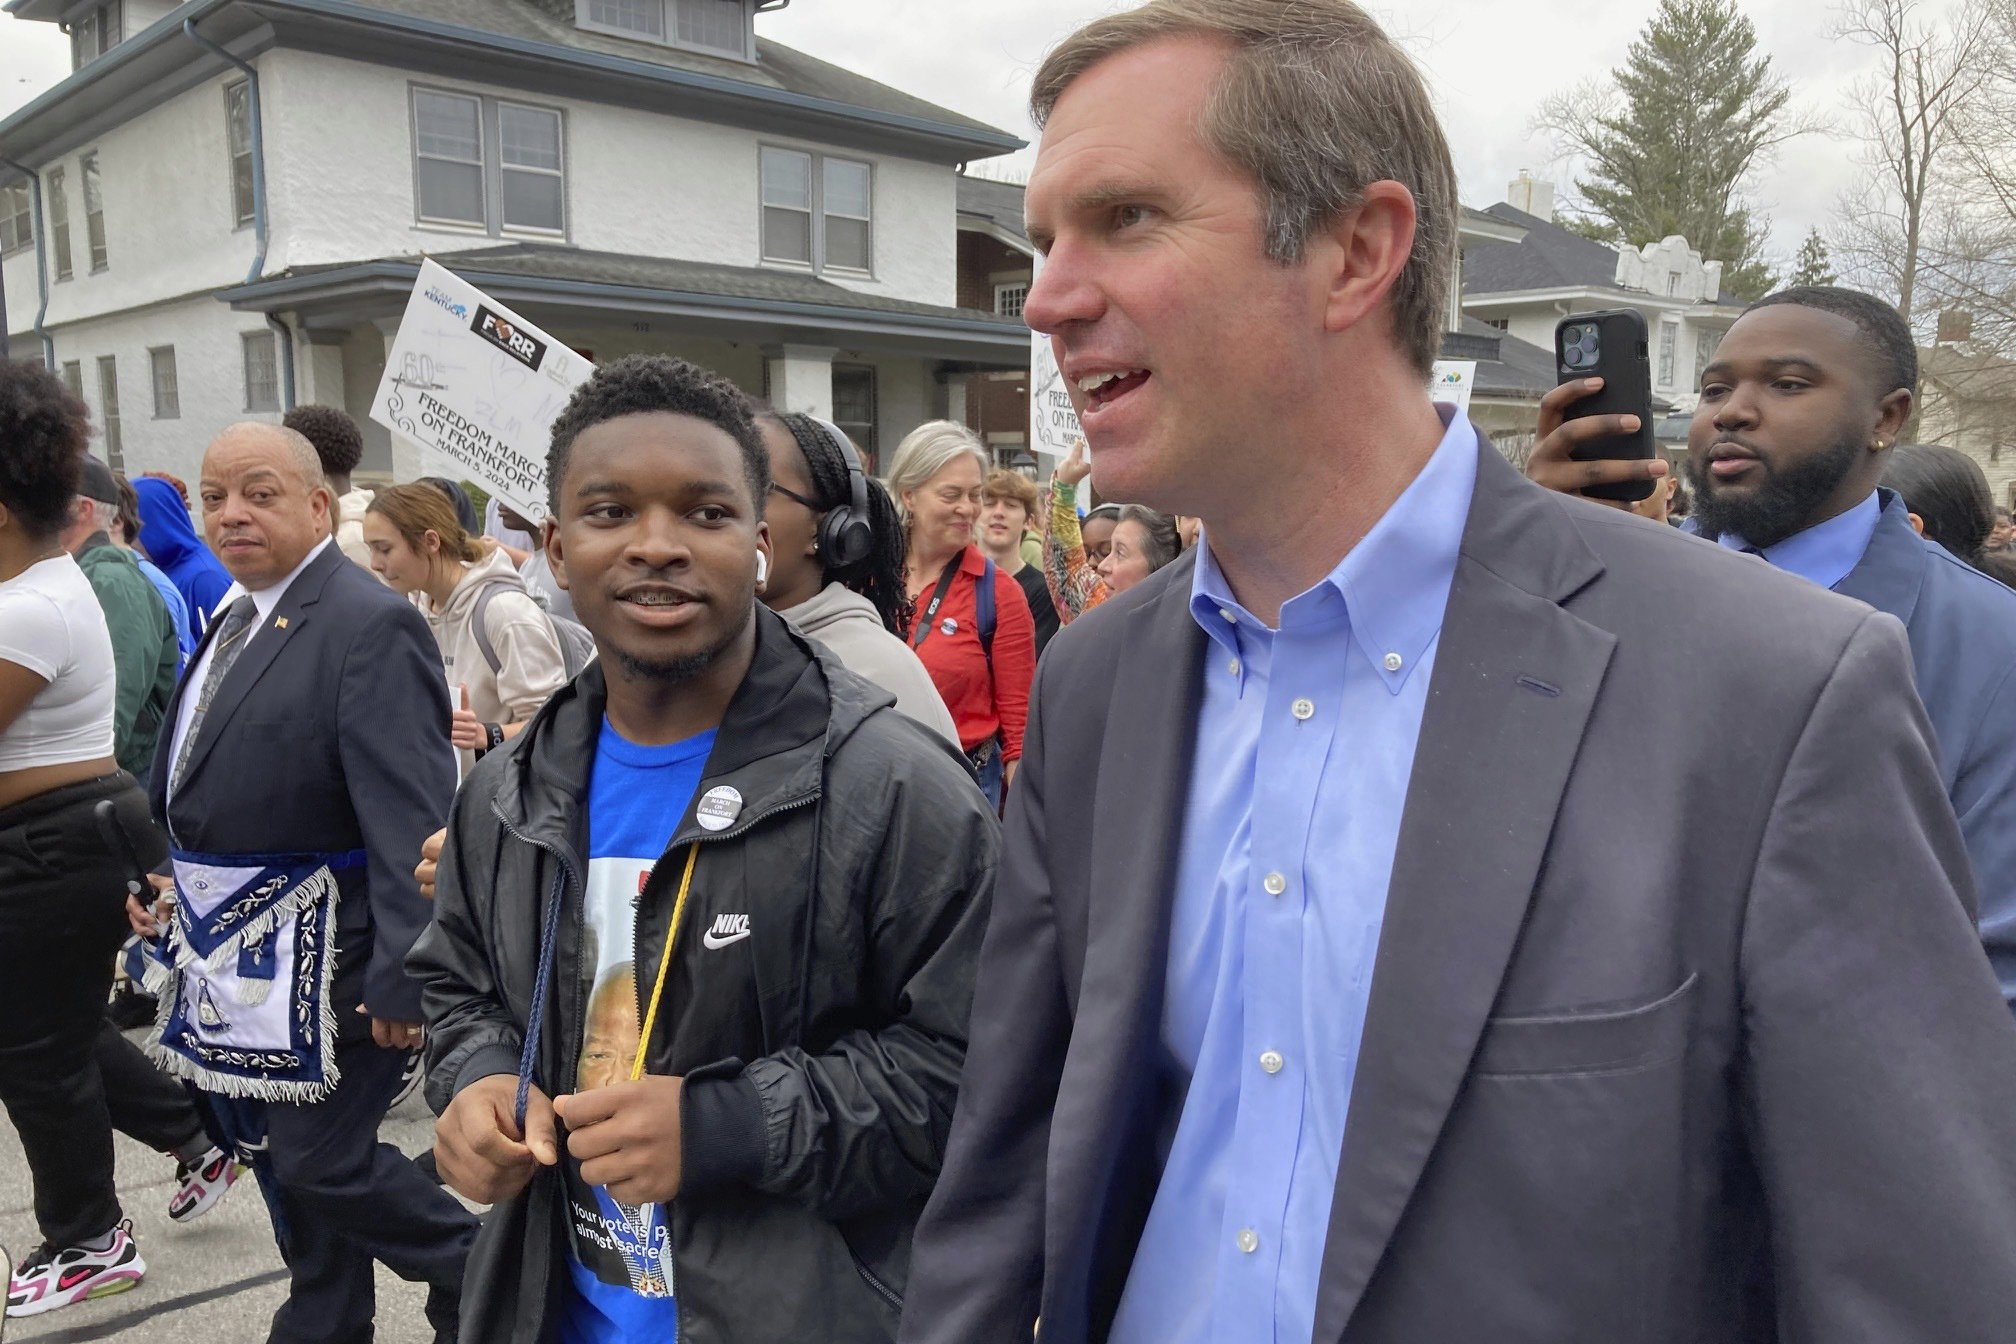 Kentucky Gov. Andy Beshear, right, chats with a student as they march, Tuesday, March 5, 2024, in Frankfort, Ky. They joined others to commemorate a landmark civil rights event known as the 1964 March on Frankfort. (AP Photo/Bruce Schreiner)